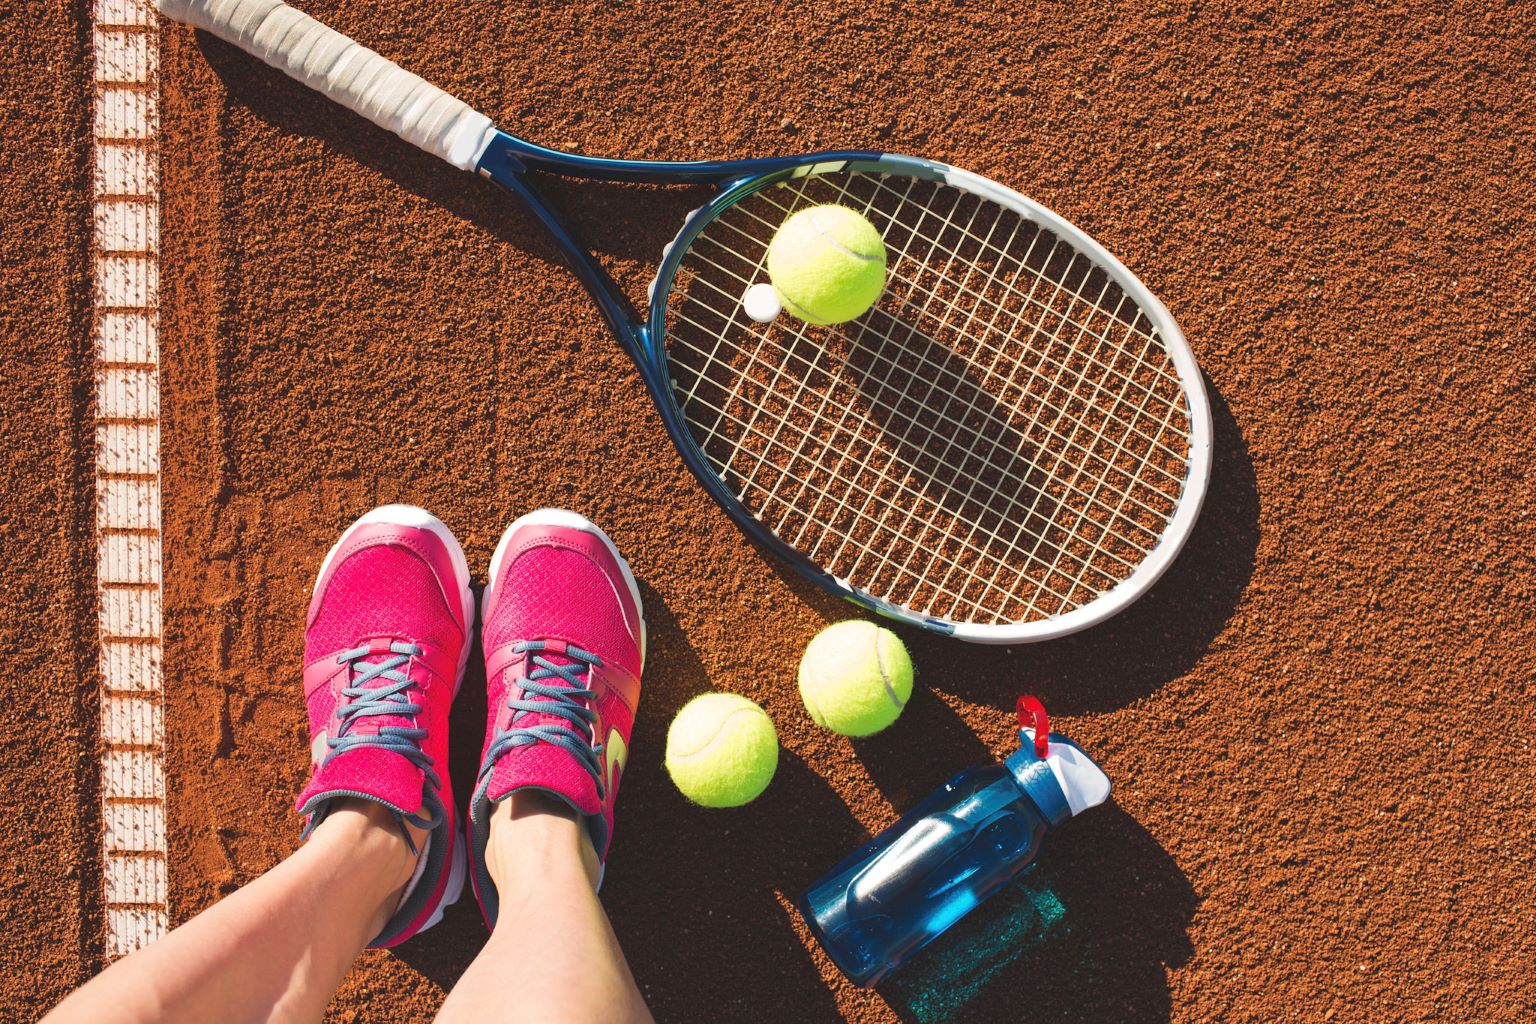 To play tennis you need a tennis raquet, balls and tennis shoes